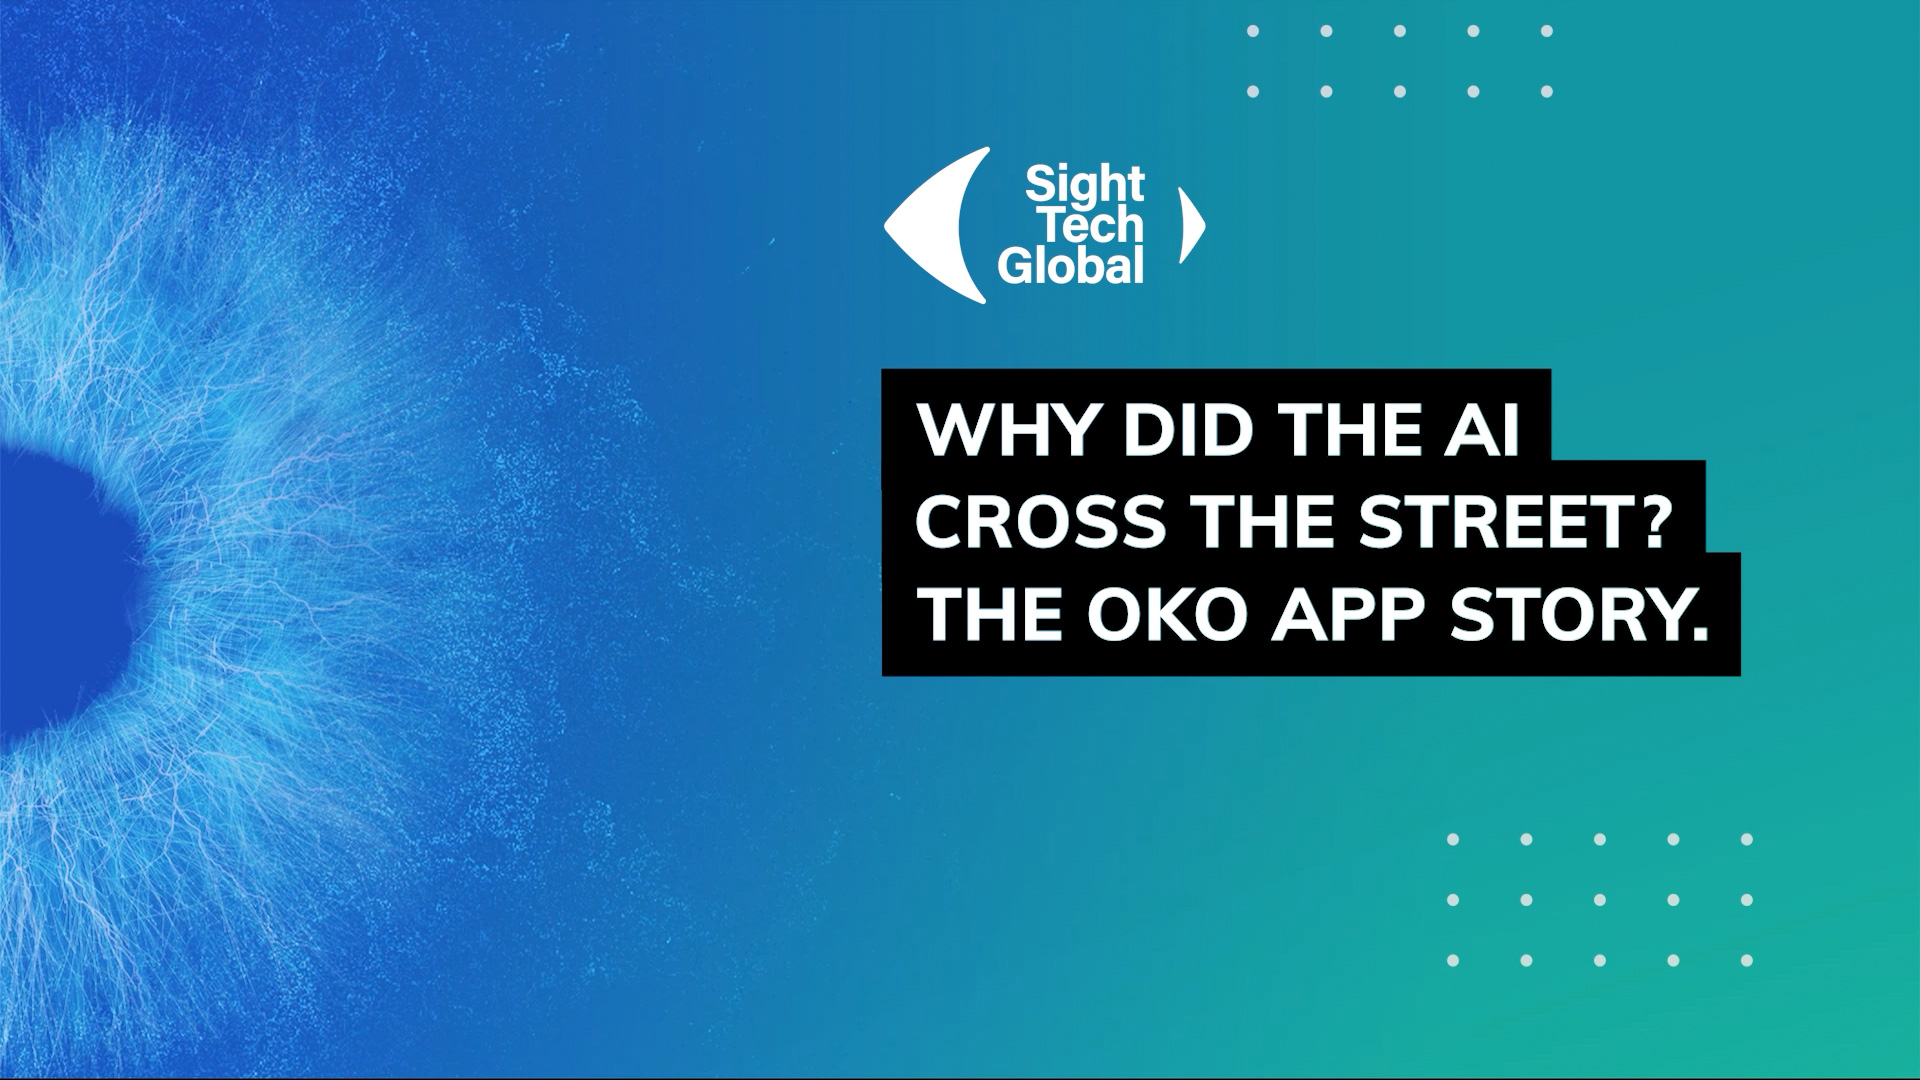 Why did the AI cross the street? The OKO app story